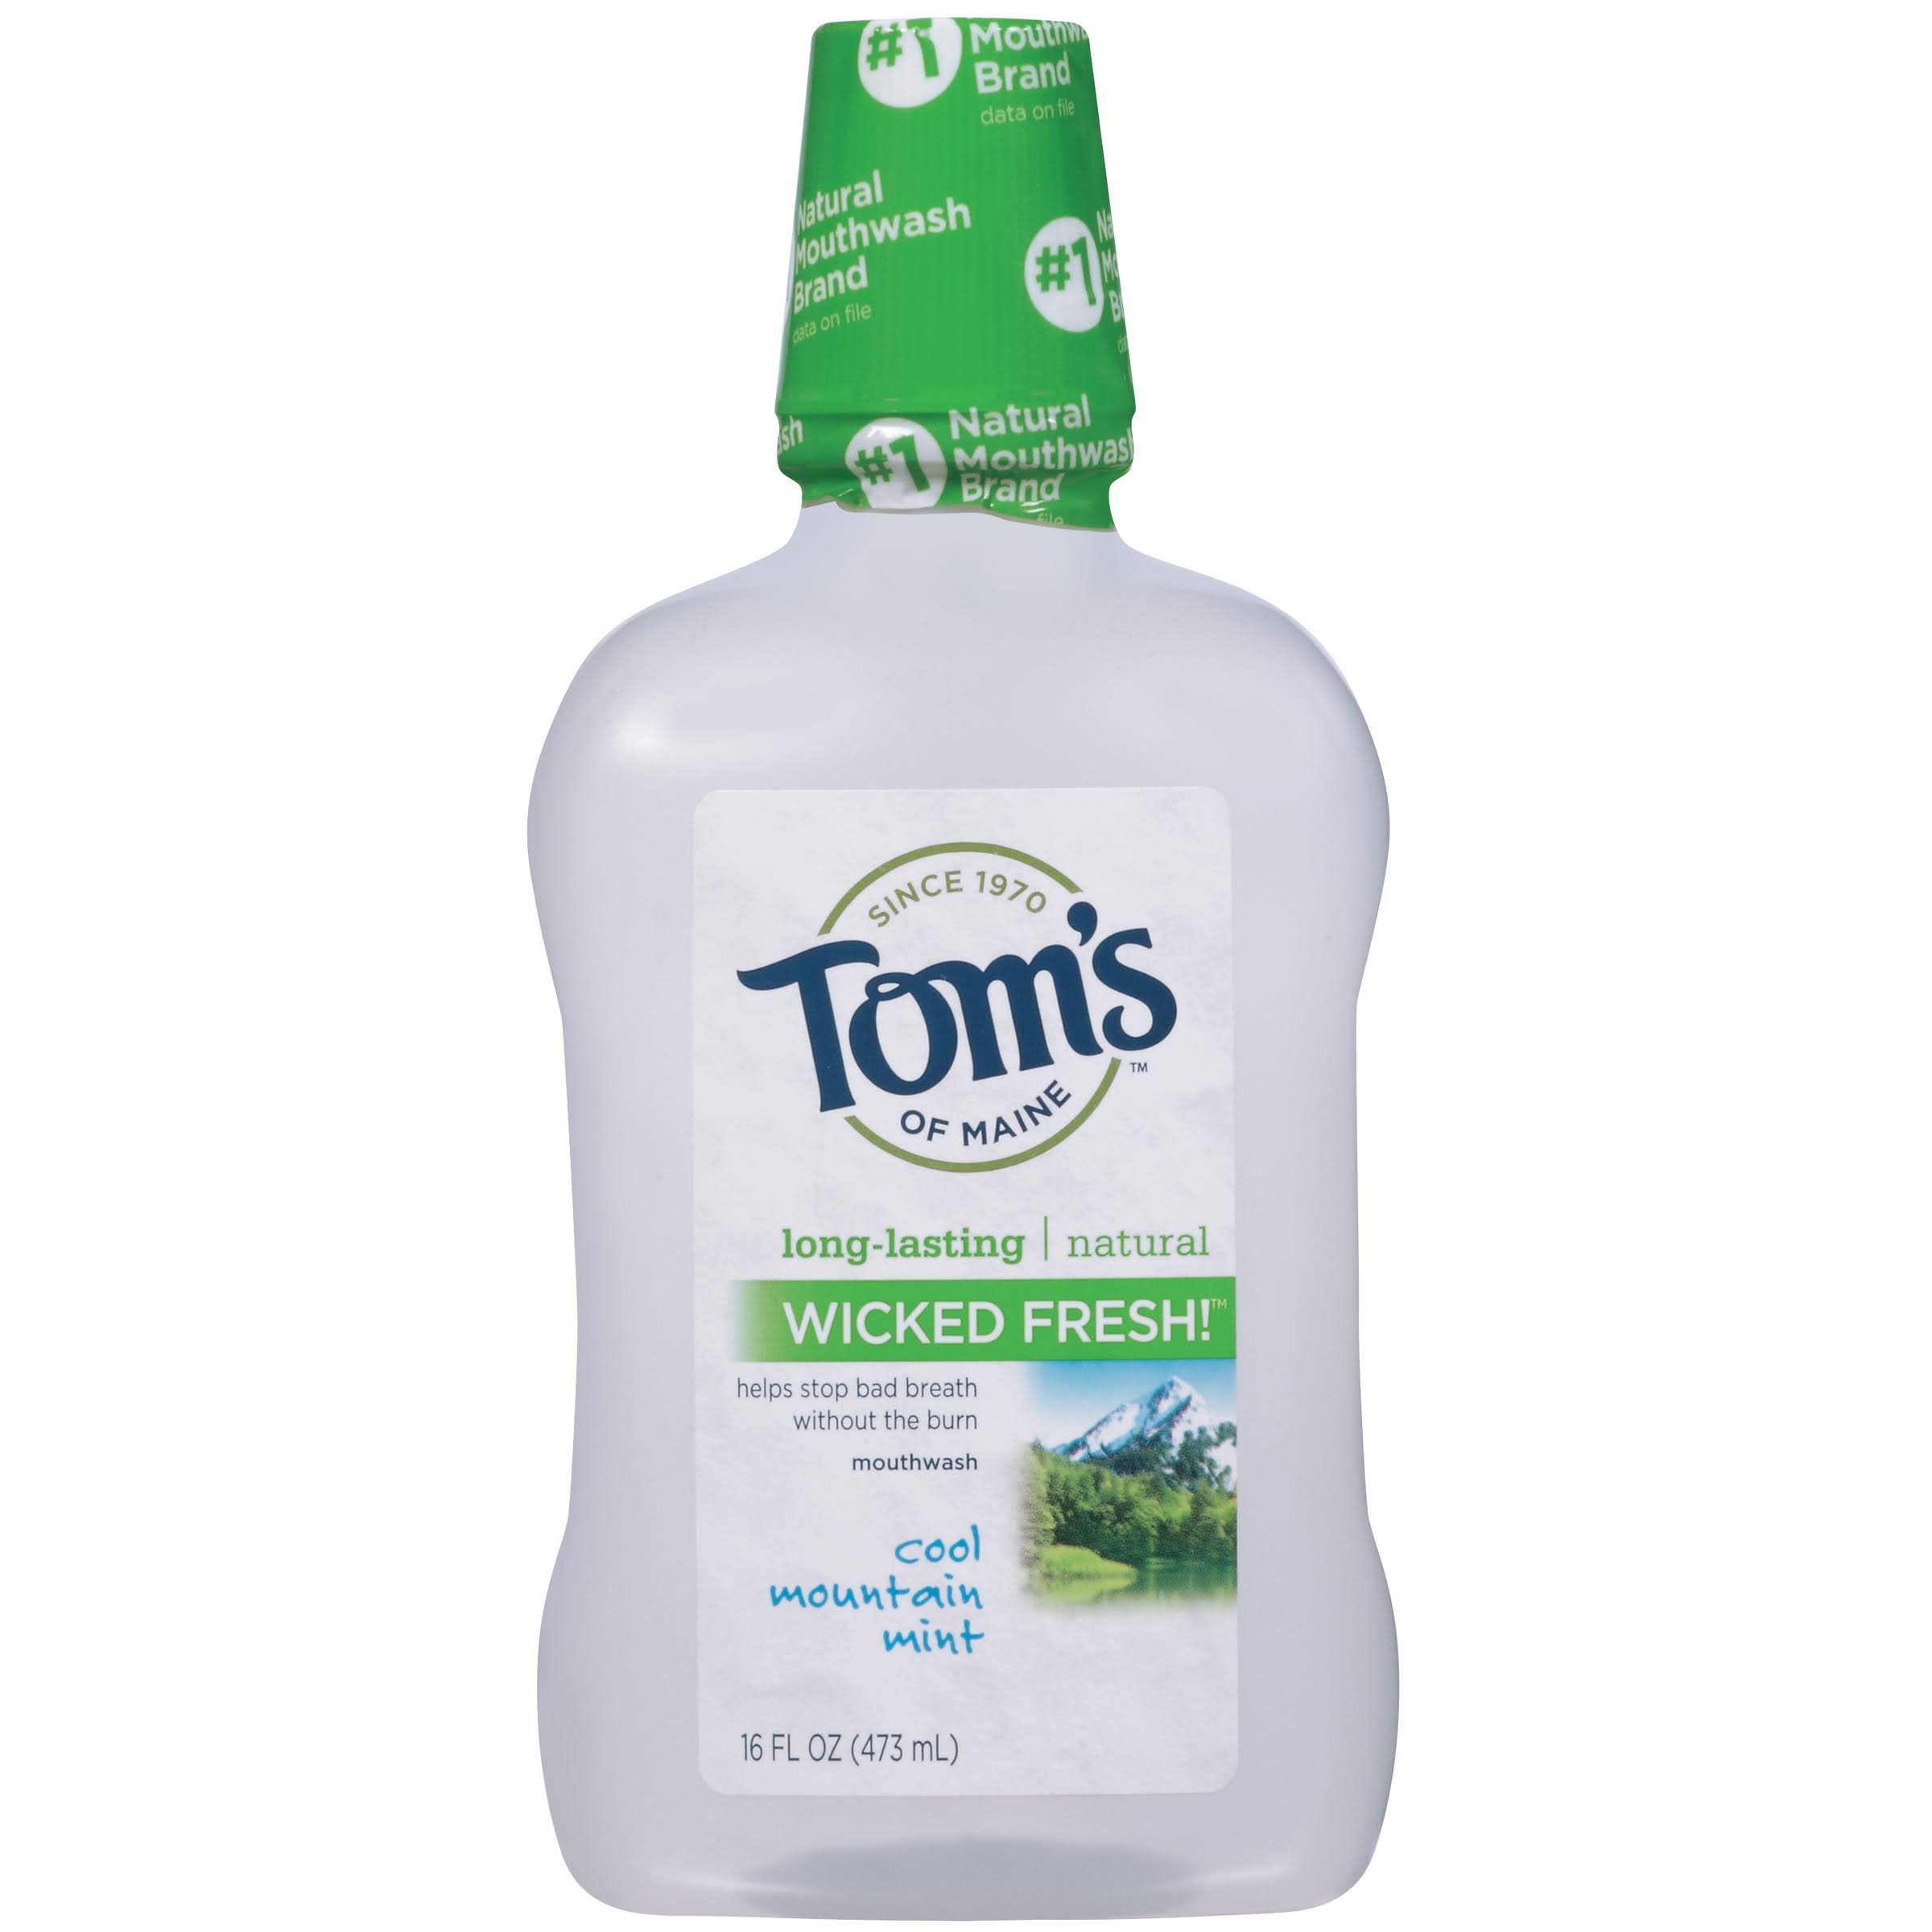 Tom's of Maine Wicked Fresh Mouthwash - Cool Mountain Mist, 473ml